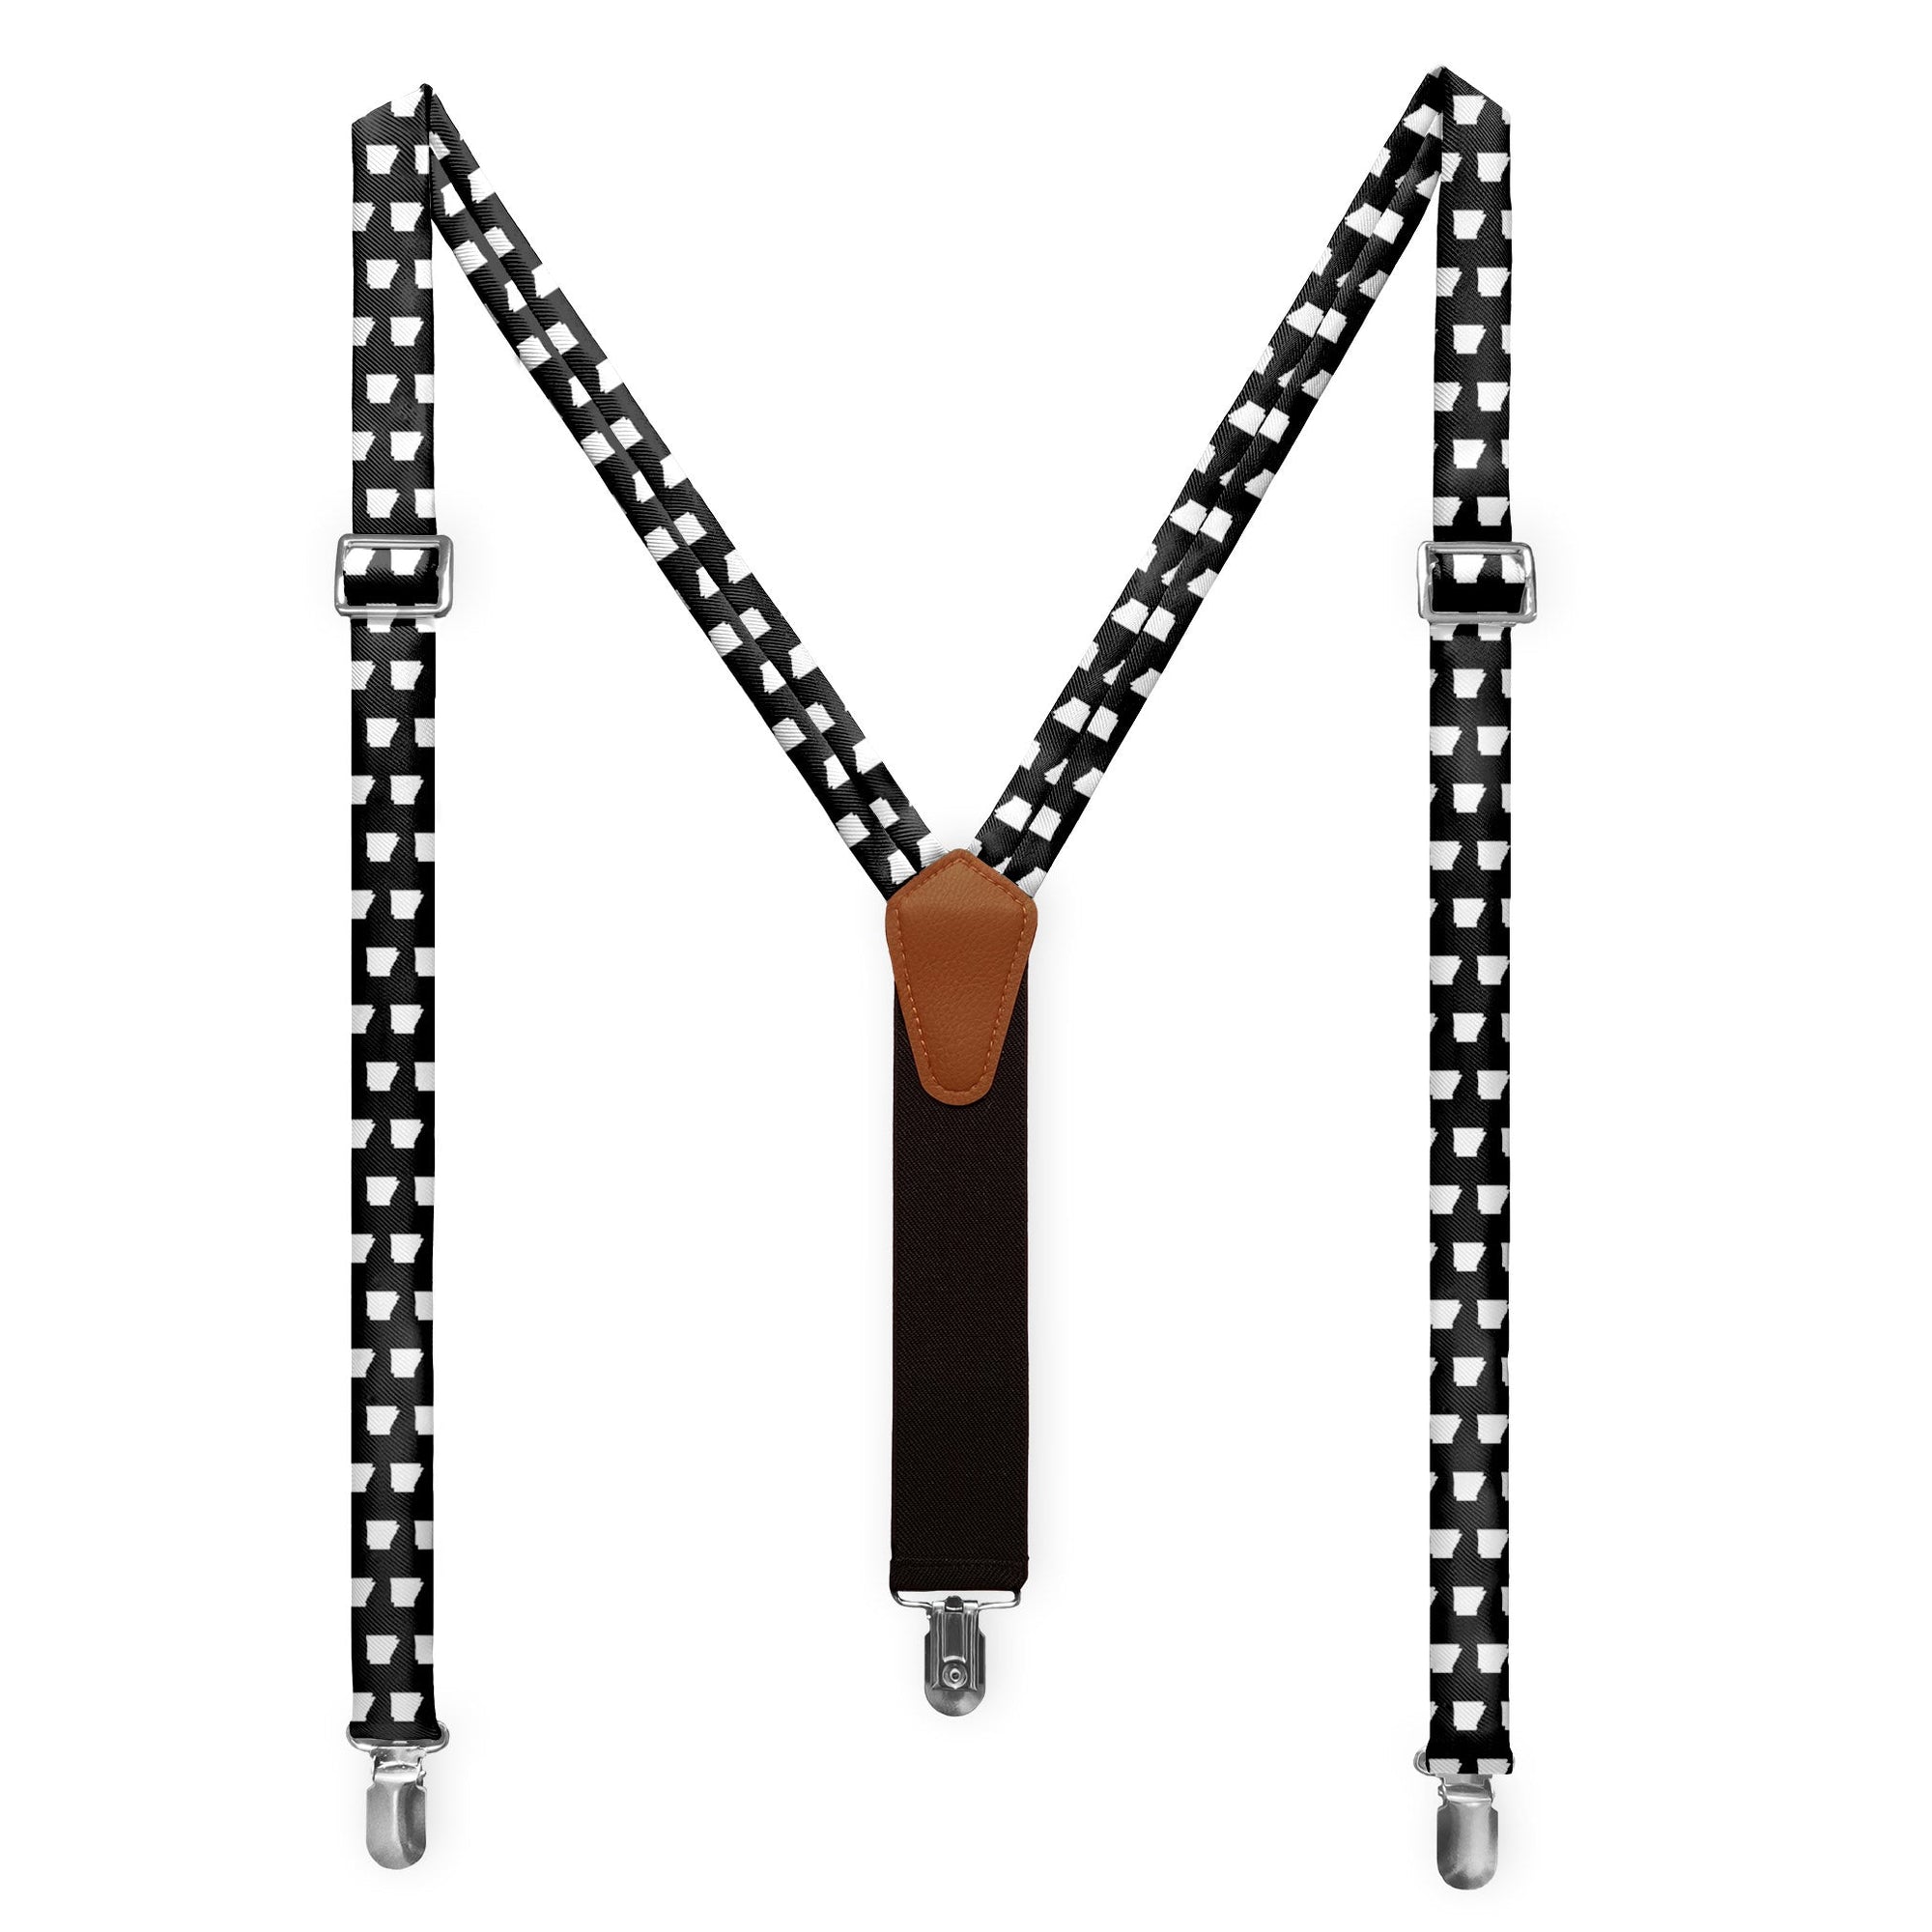 Arkansas State Outline Suspenders -  -  - Knotty Tie Co.